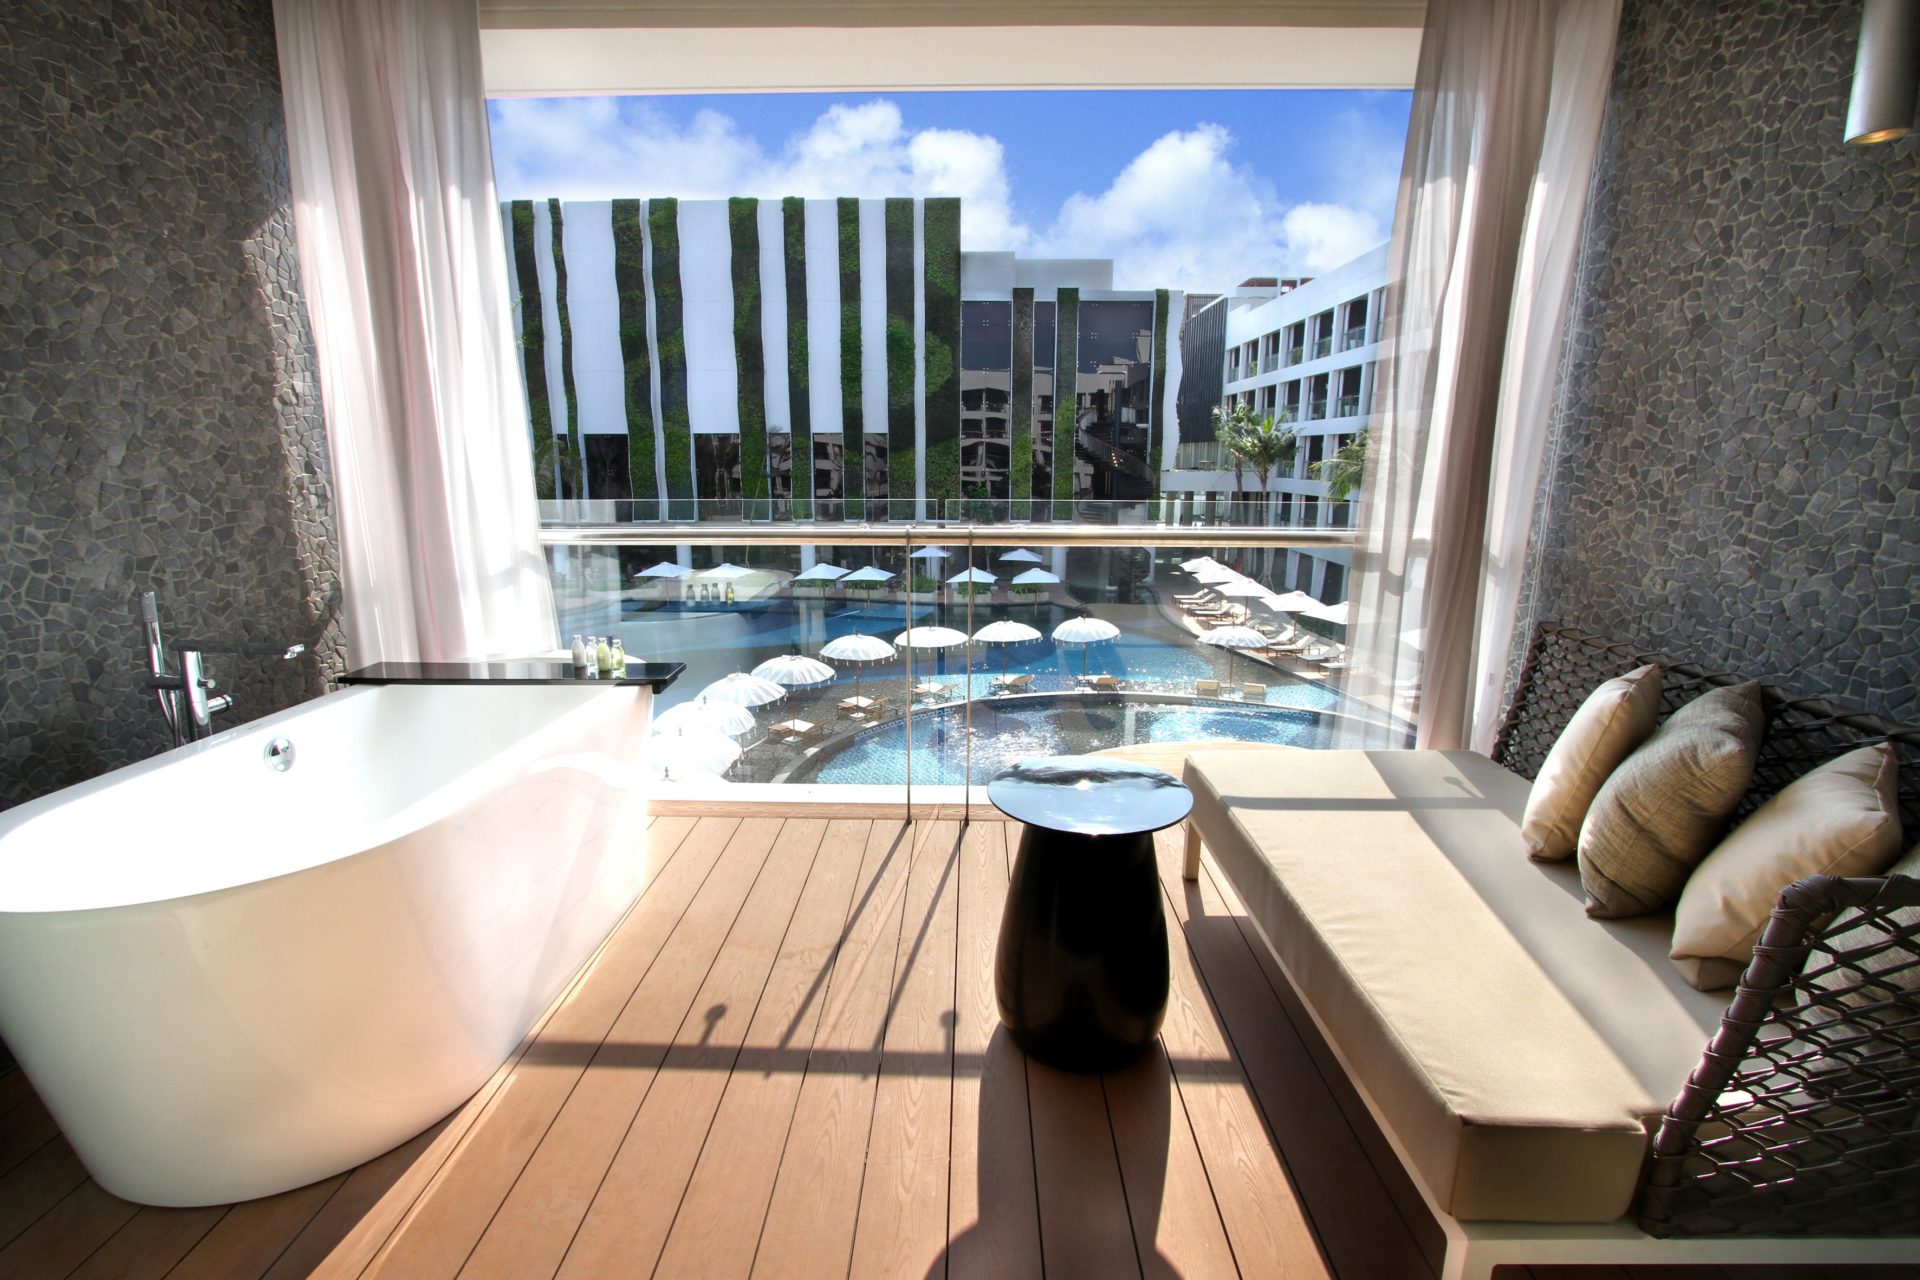 Deluxe Room Pool View 5 Star Bali Resorts The Stones